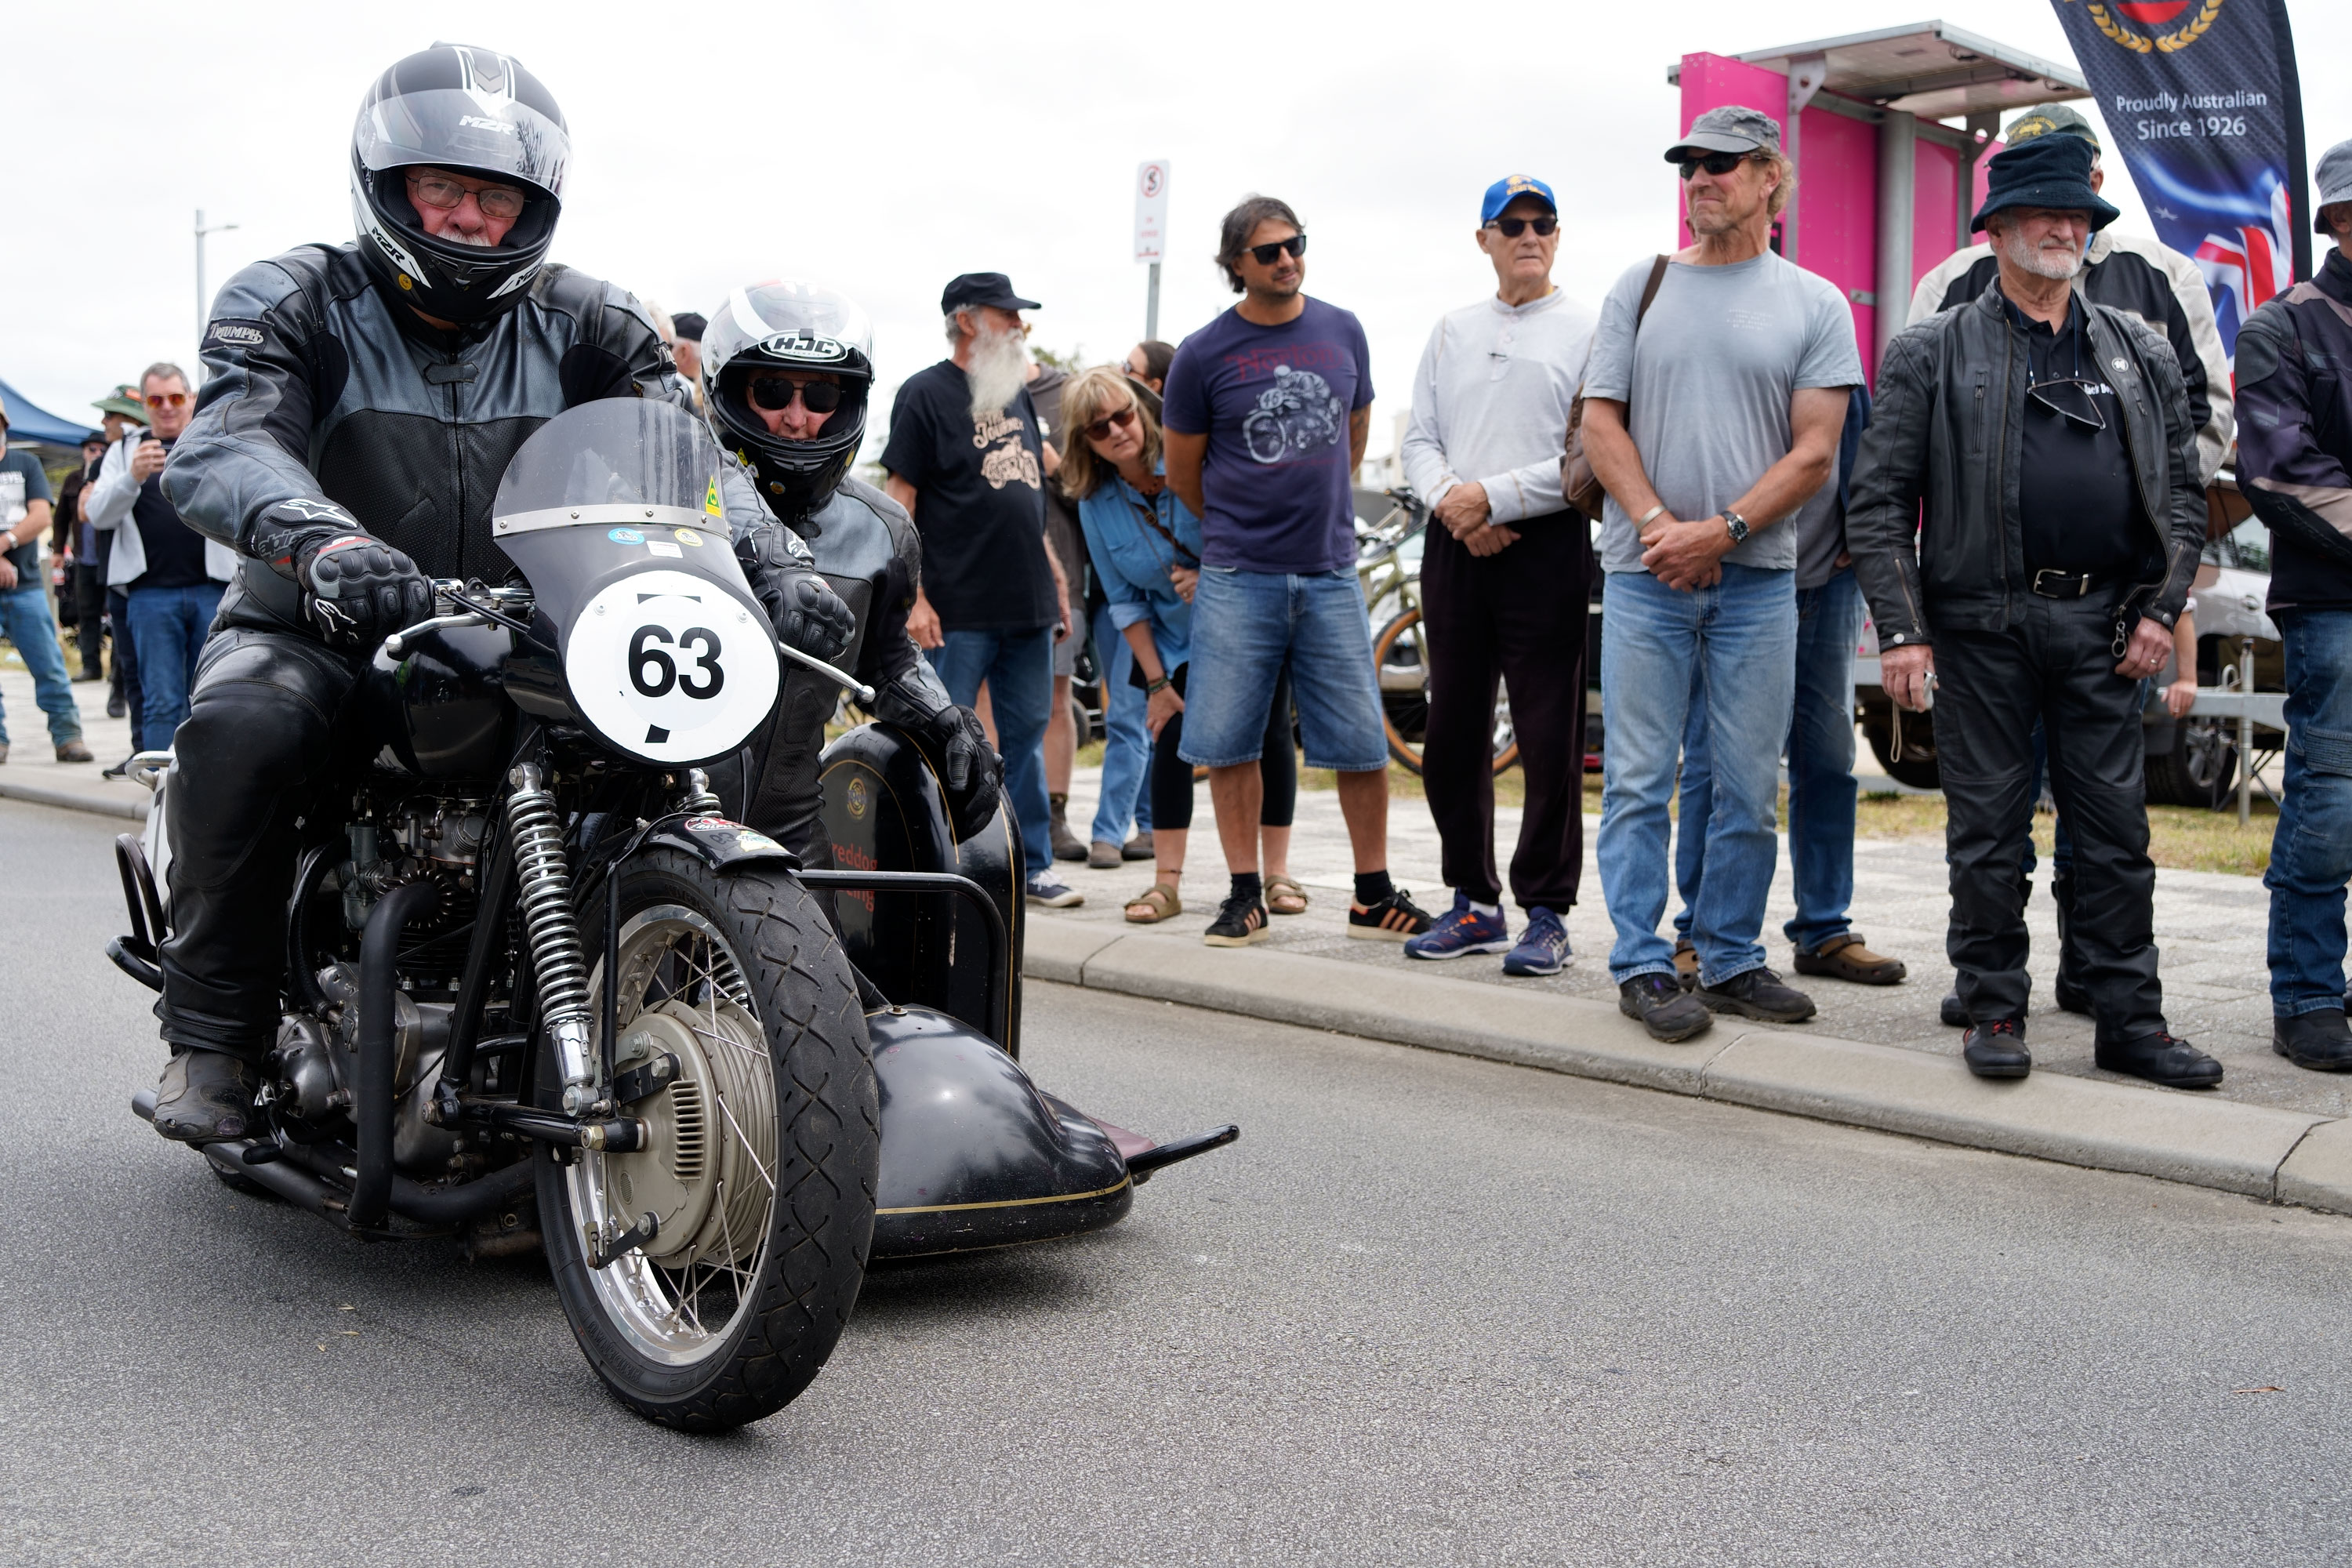 Triumph sidecar rider and swinger ready to go up the hillclimb.